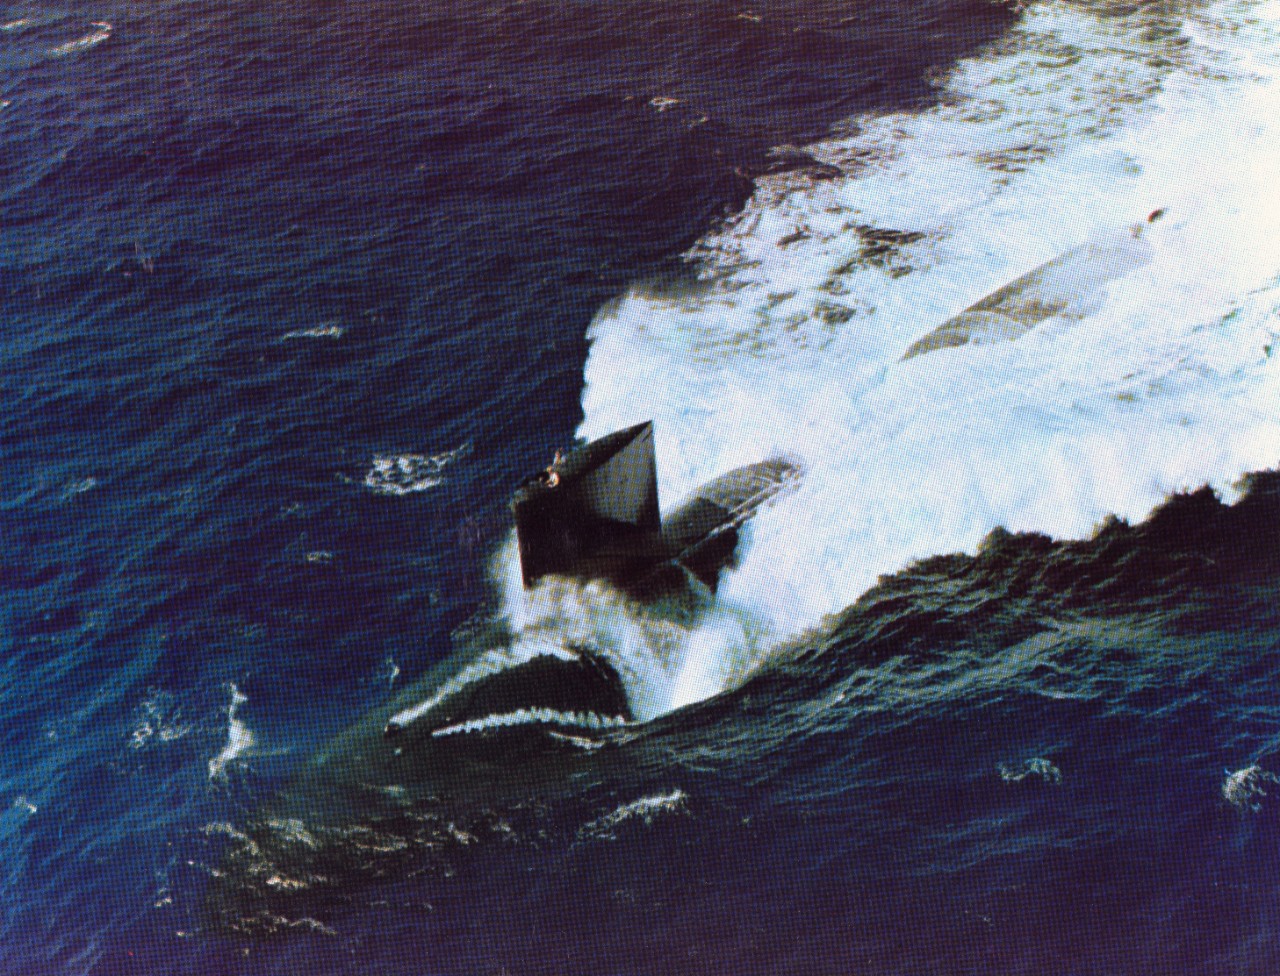 Aerial view of nuclear powered attack submarine USS Sturgeon (SSN-637) underway on the surface